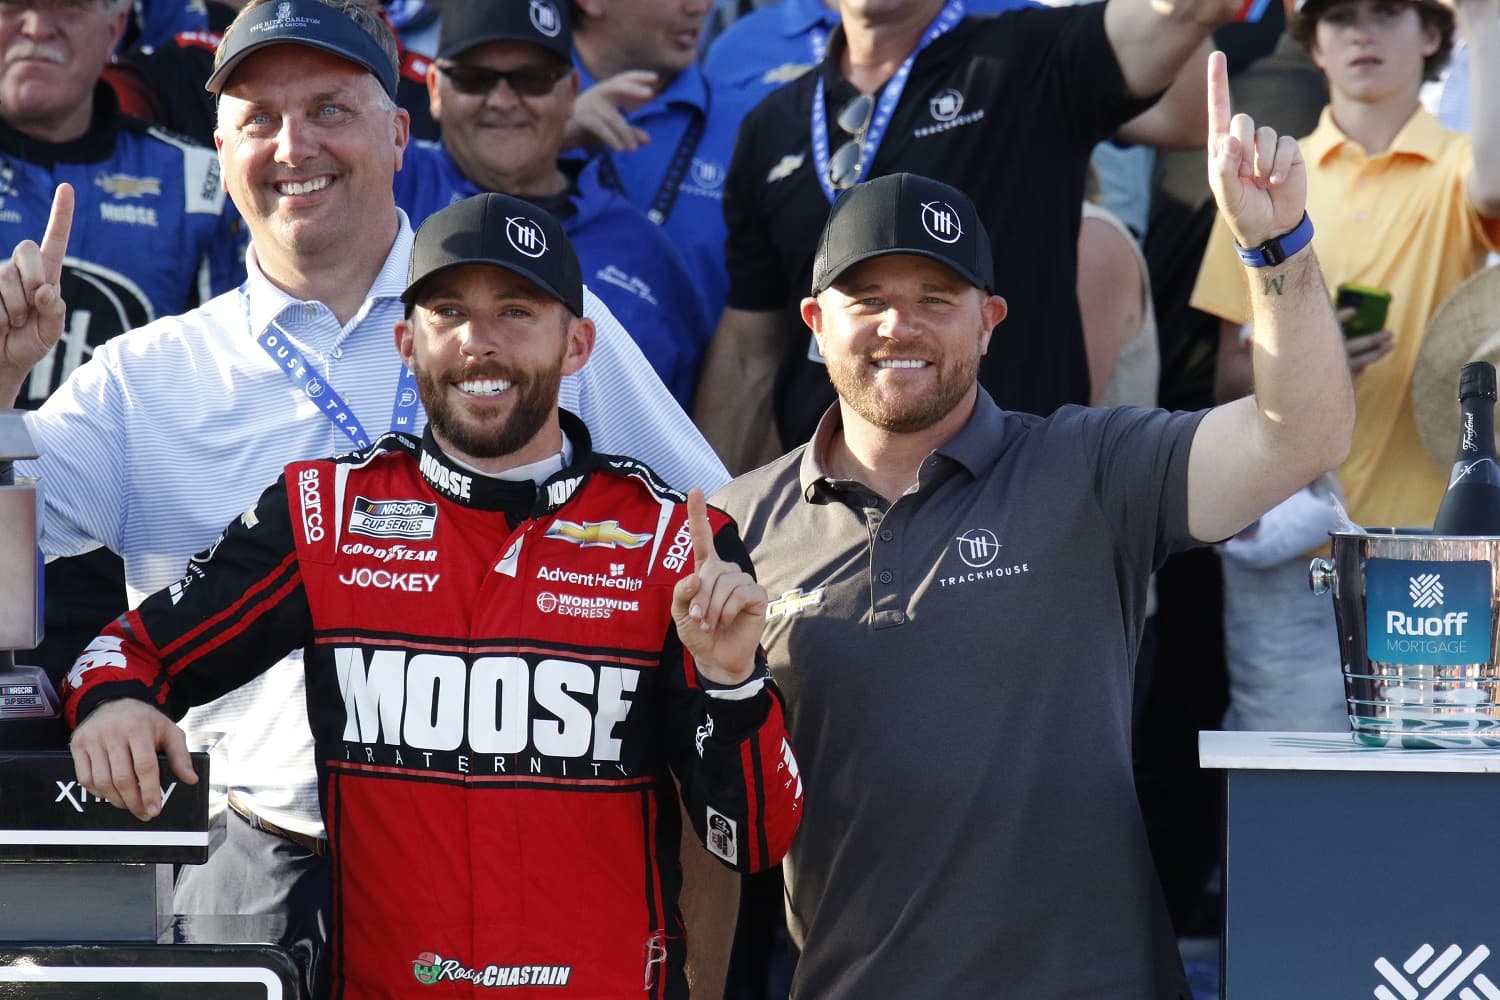 Ross Chastain poses in Victory Lane with team co-owner Justin Marks after winning the NASCAR Cup Series Geico 500 on April 24, 2022, at Talladega SuperSpeedway. | Jeff Robinson/Icon Sportswire via Getty Images